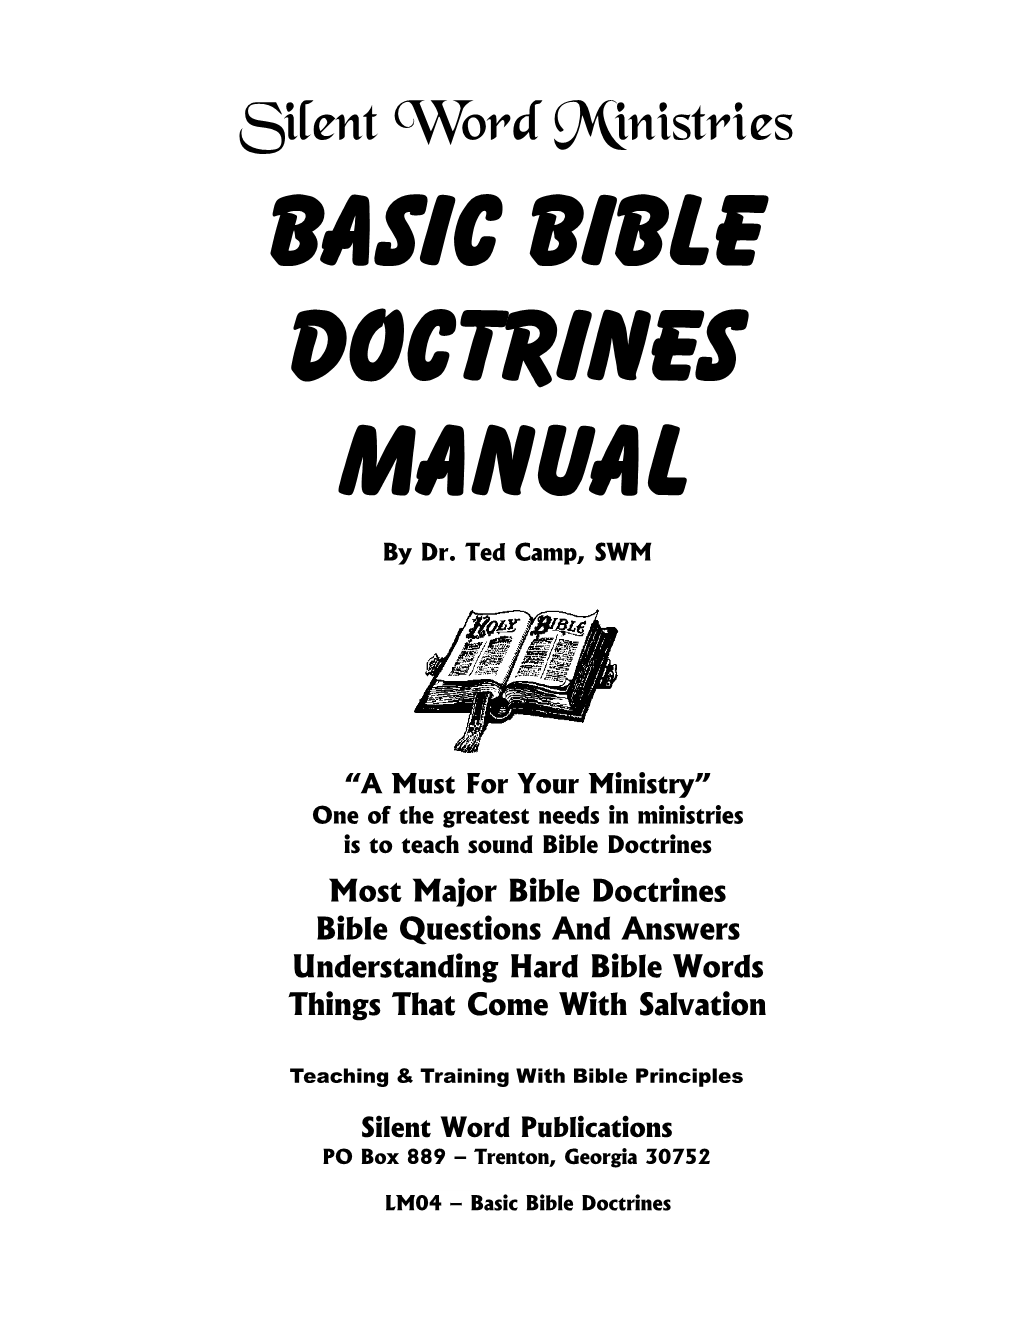 Silent Word Ministries Basic Bible Doctrines Manual by Dr